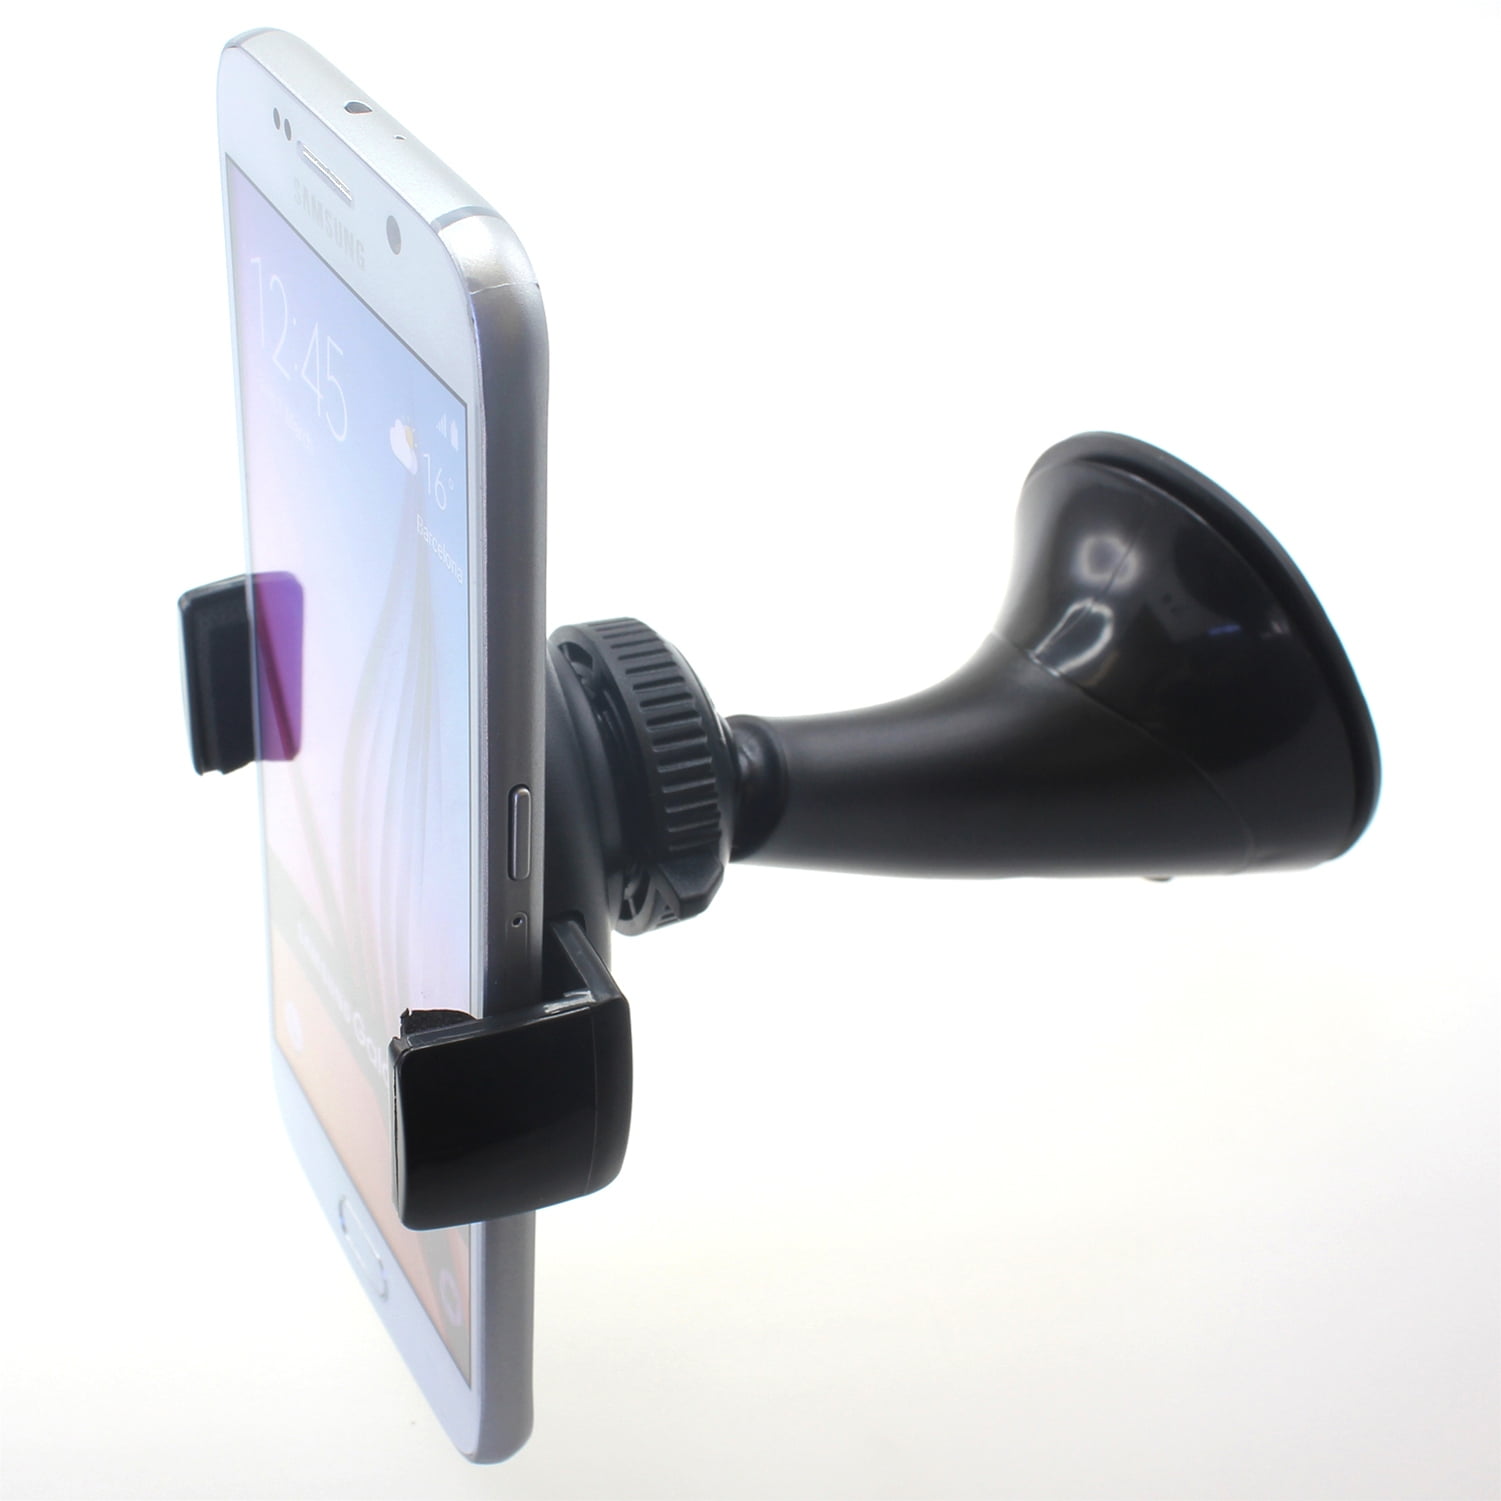 Windshield Car Cradle with Extra Dashboard Base for iPhone 11 Pro Max/11 Pro/11/Xs Max/Xs/Xr/X/8/7 Windscreen Car Mount Grip Samsung S20/S20+/S10/S9 Note LG UNBREAKcable Car Phone Holder